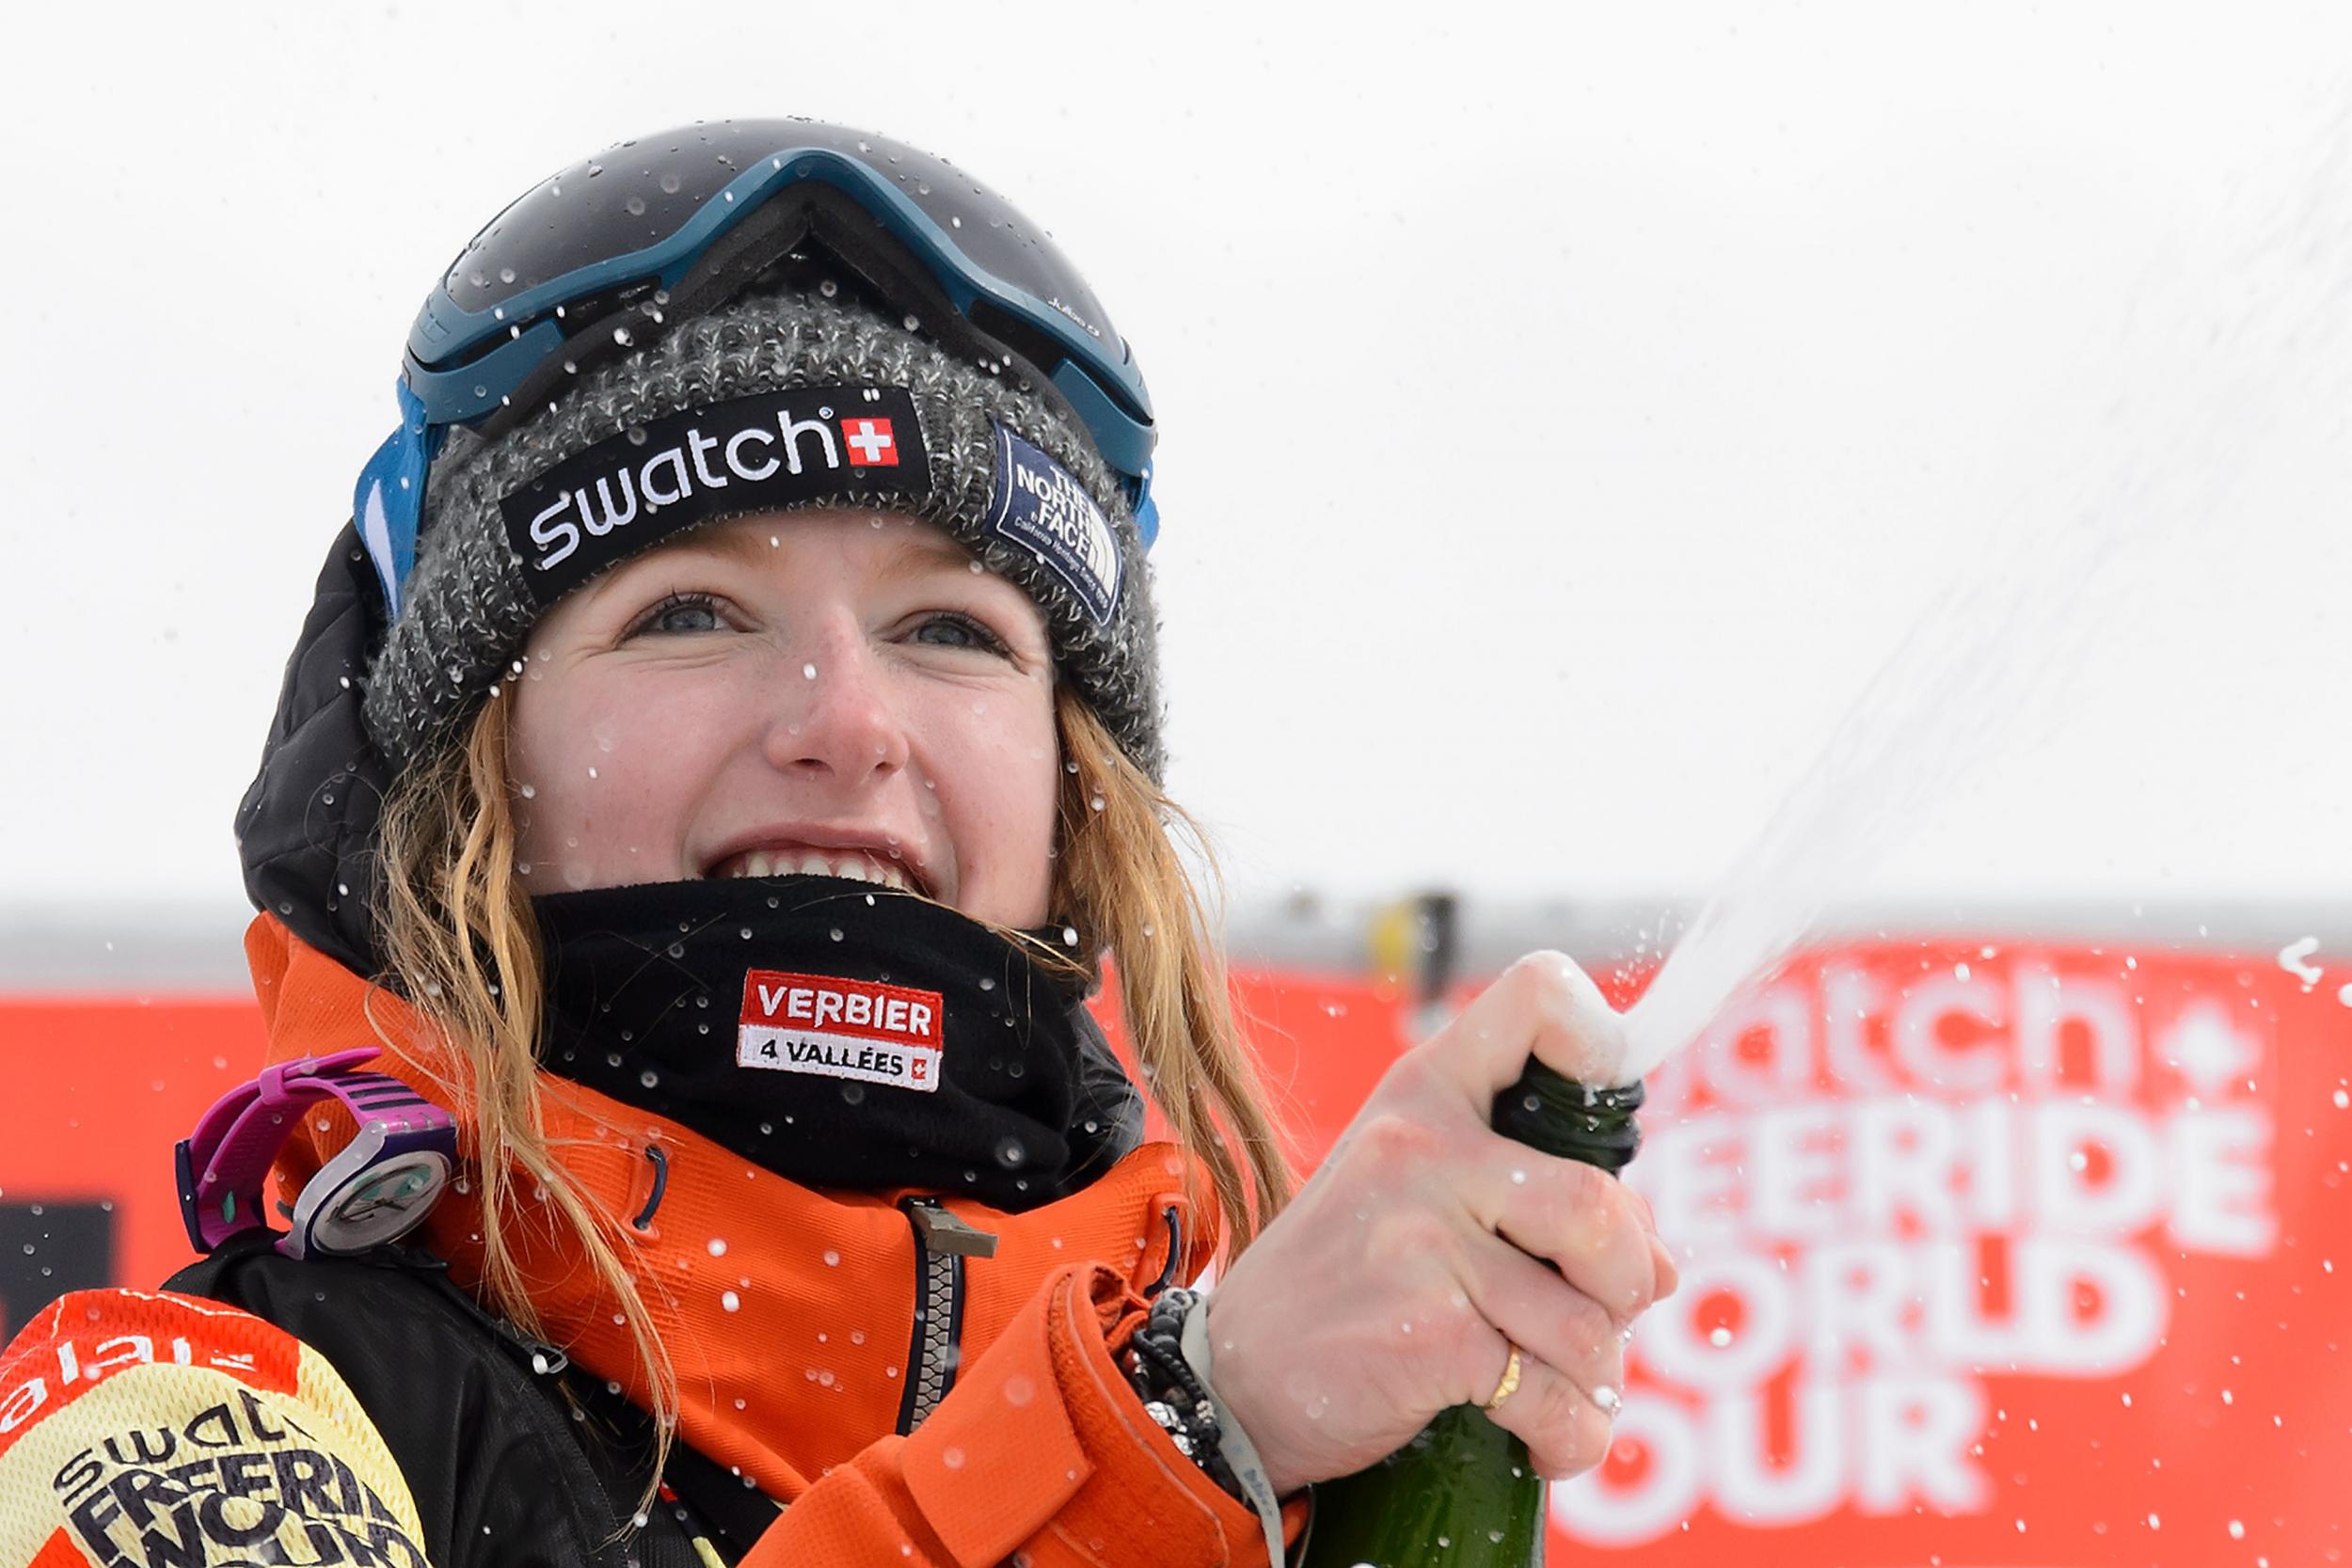 World champion Switzerland's Estelle Balet celebrating with champagne after she won the women's snowboard event at the Bec des Rosses during the Verbier Xtreme Freeride World Tour final above the Swiss Alps resort of Verbie